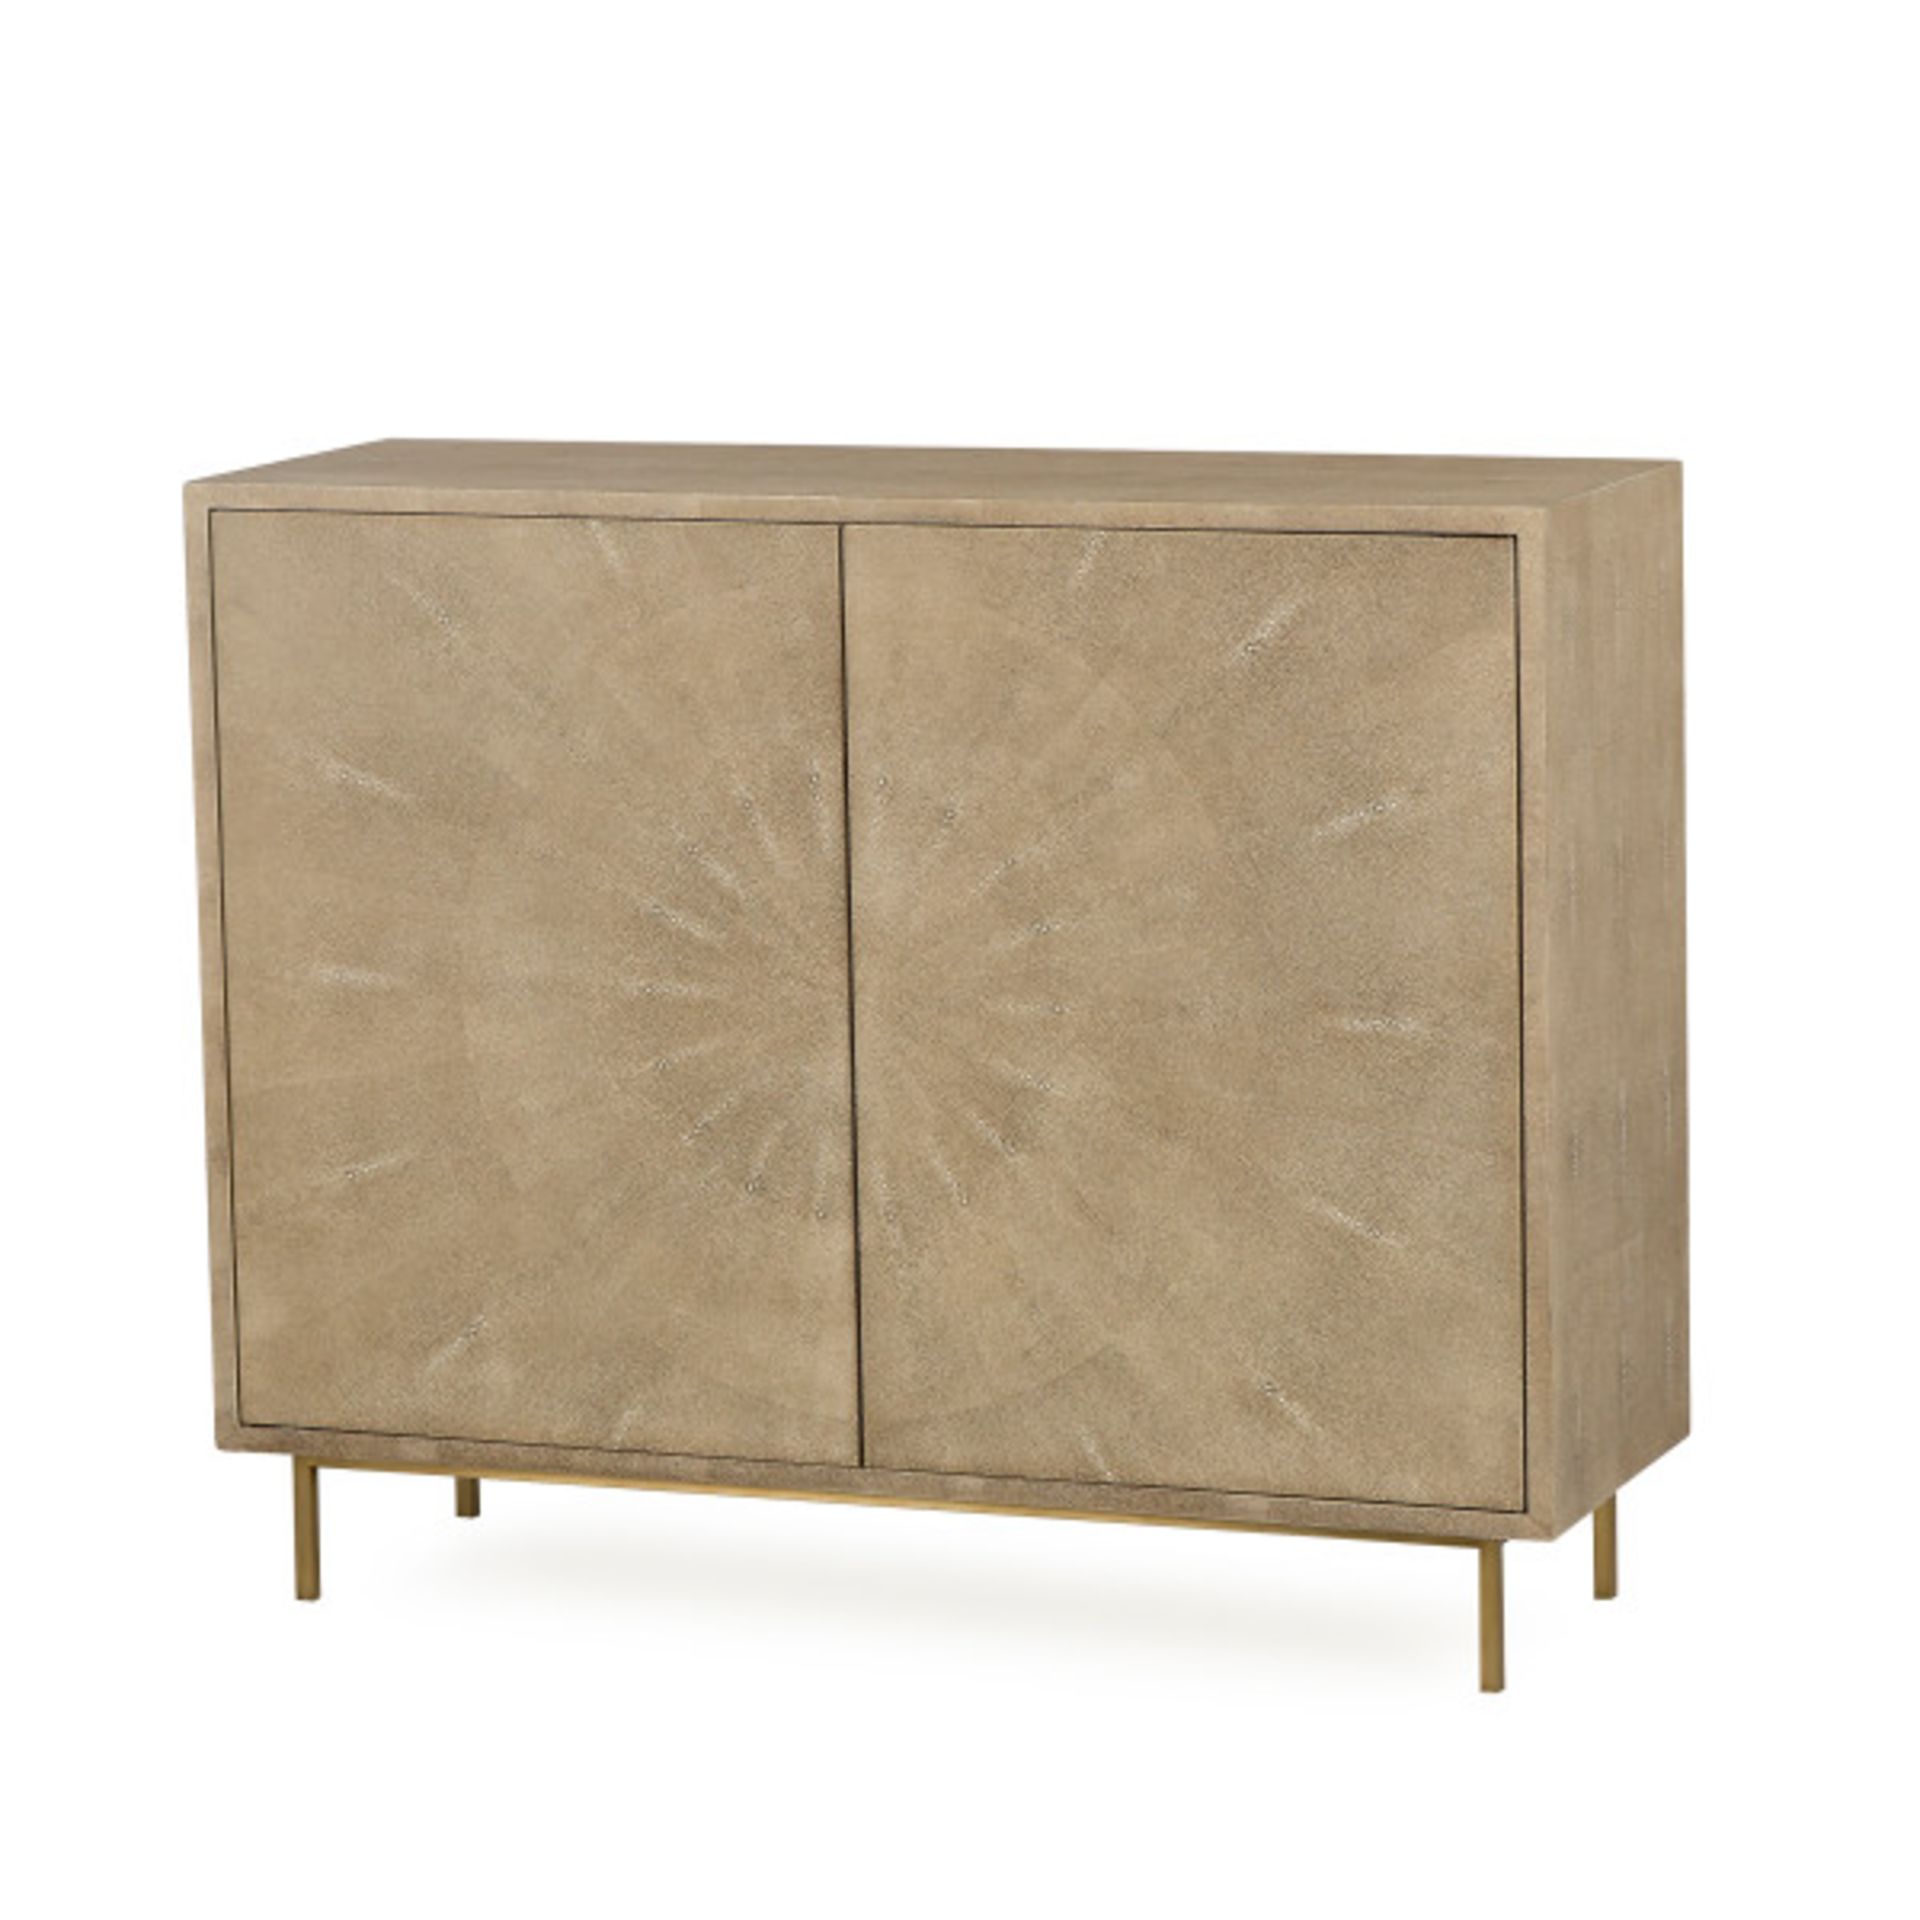 Maison 55 Crawford 2 Door Sideboard Console Narrow 2 Door Storage Console Wrapped In Cream